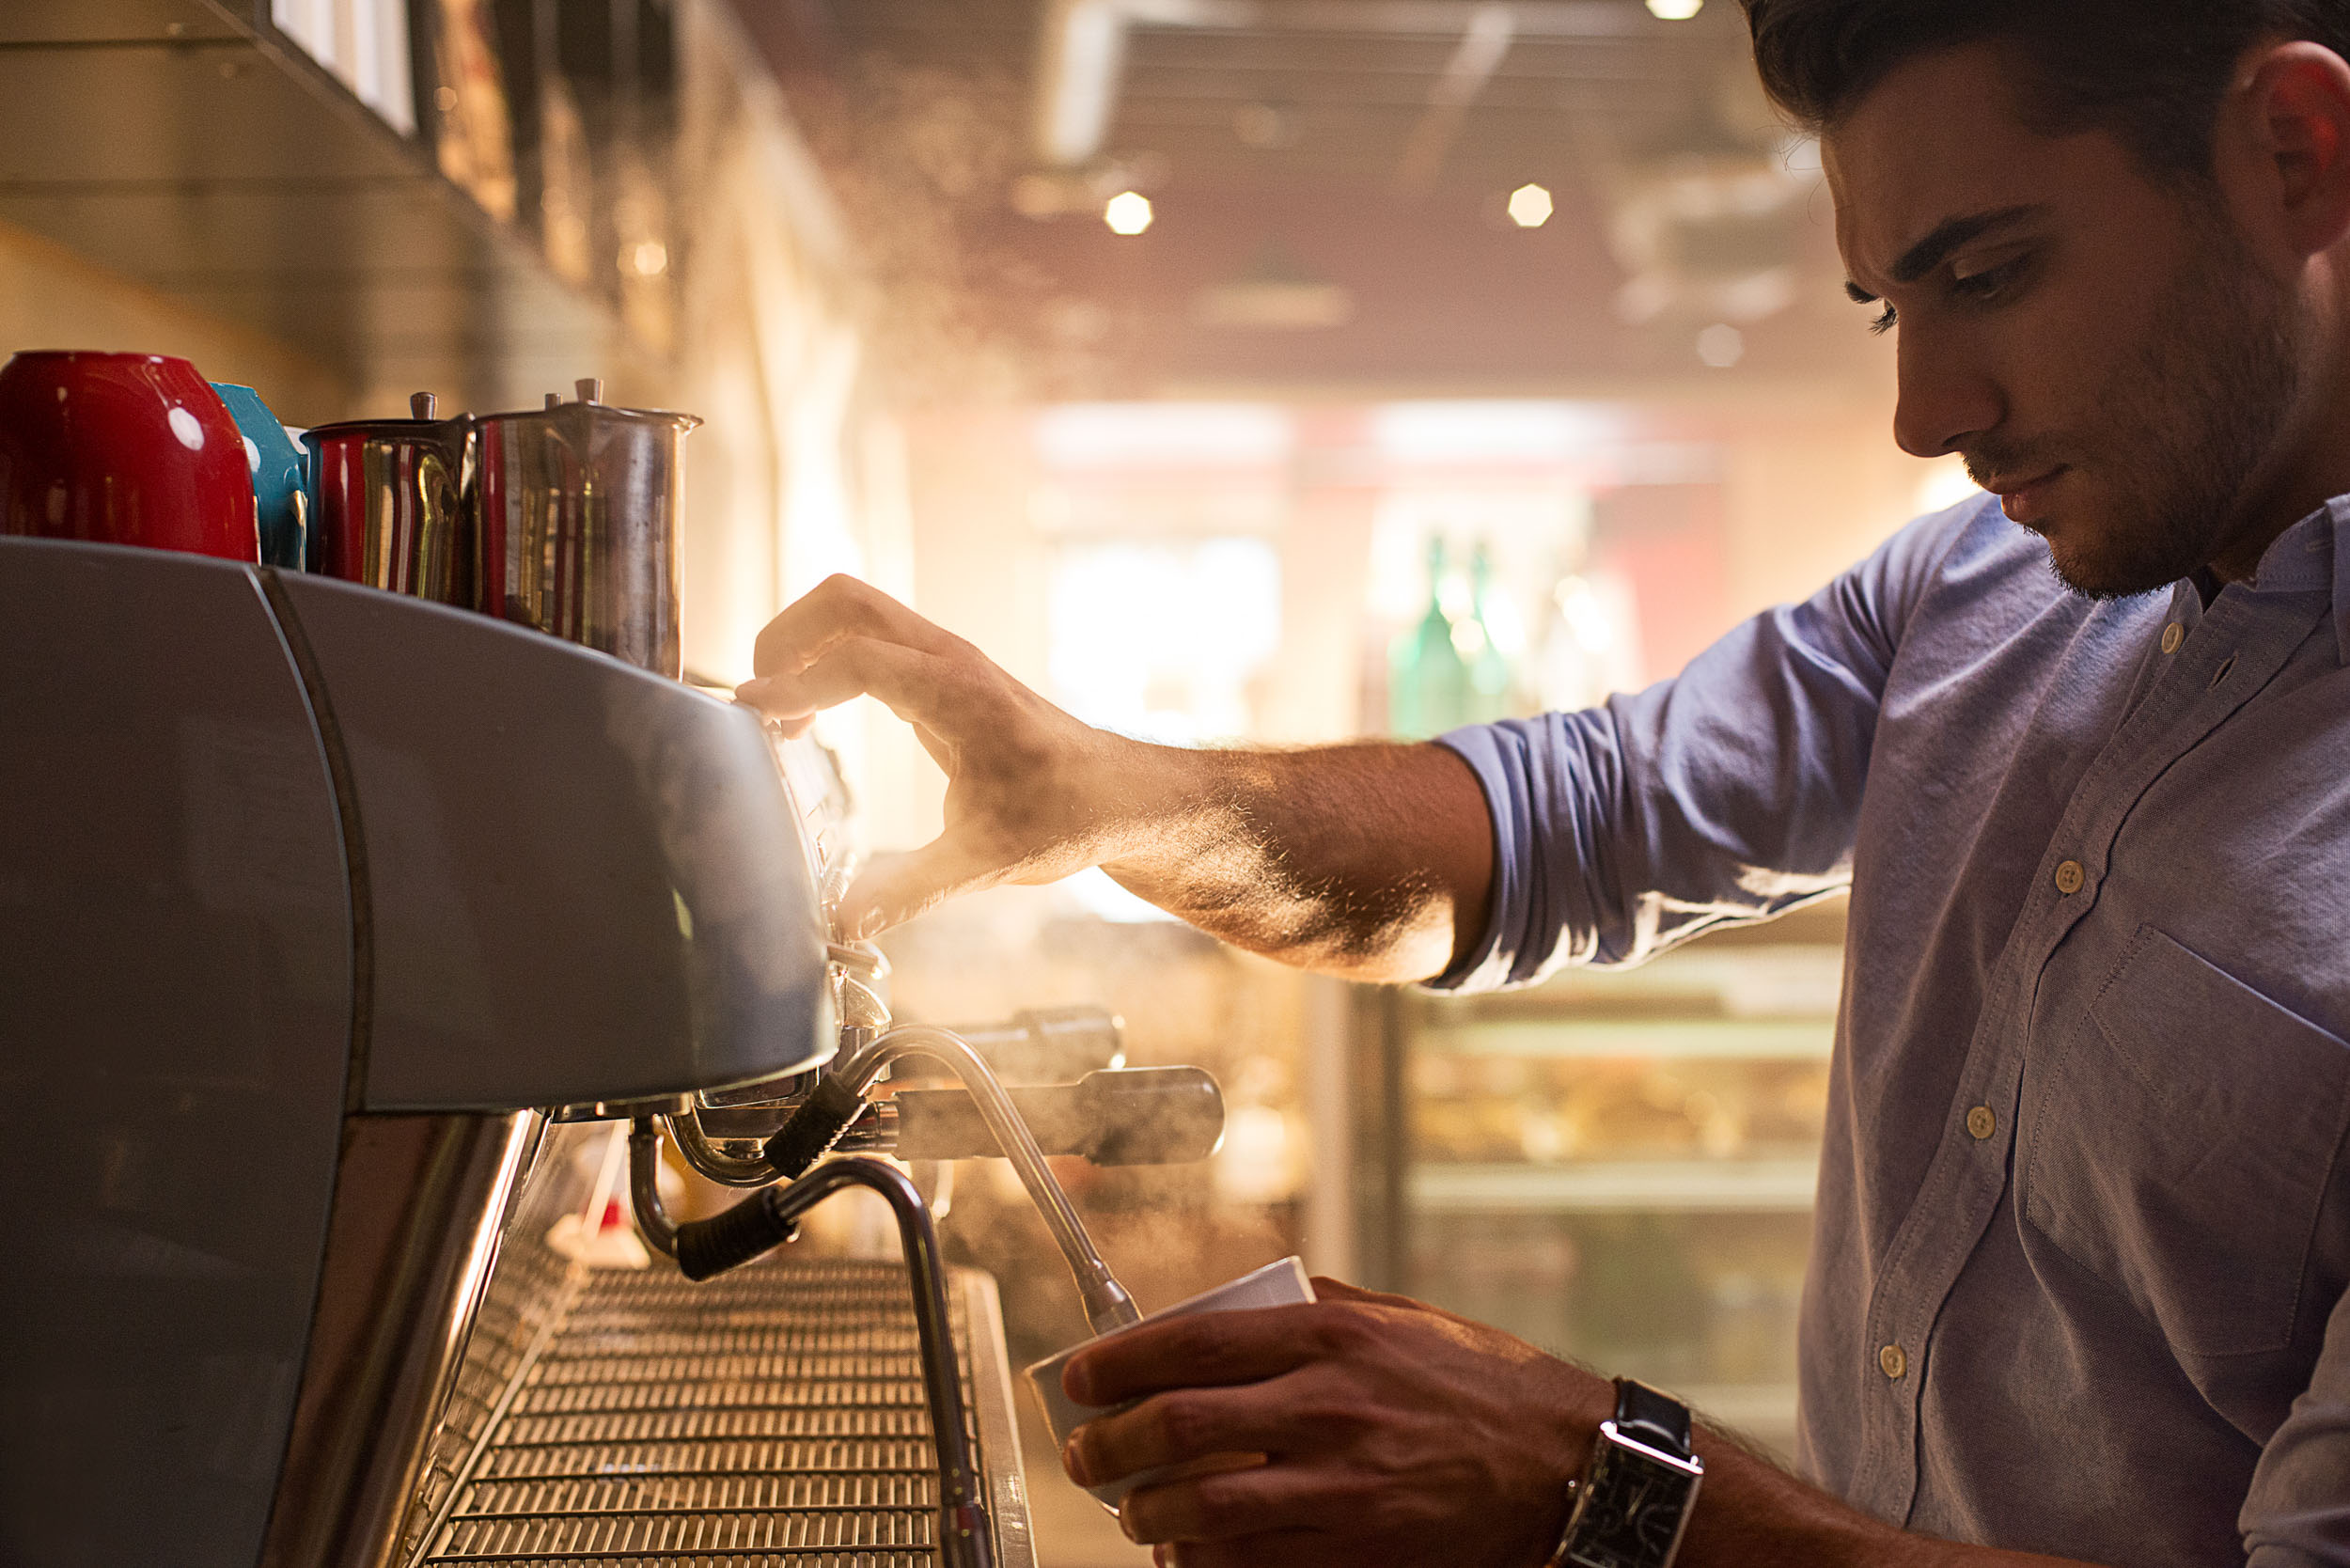 A man makes espresso in an advertisement for Kyocera phones.